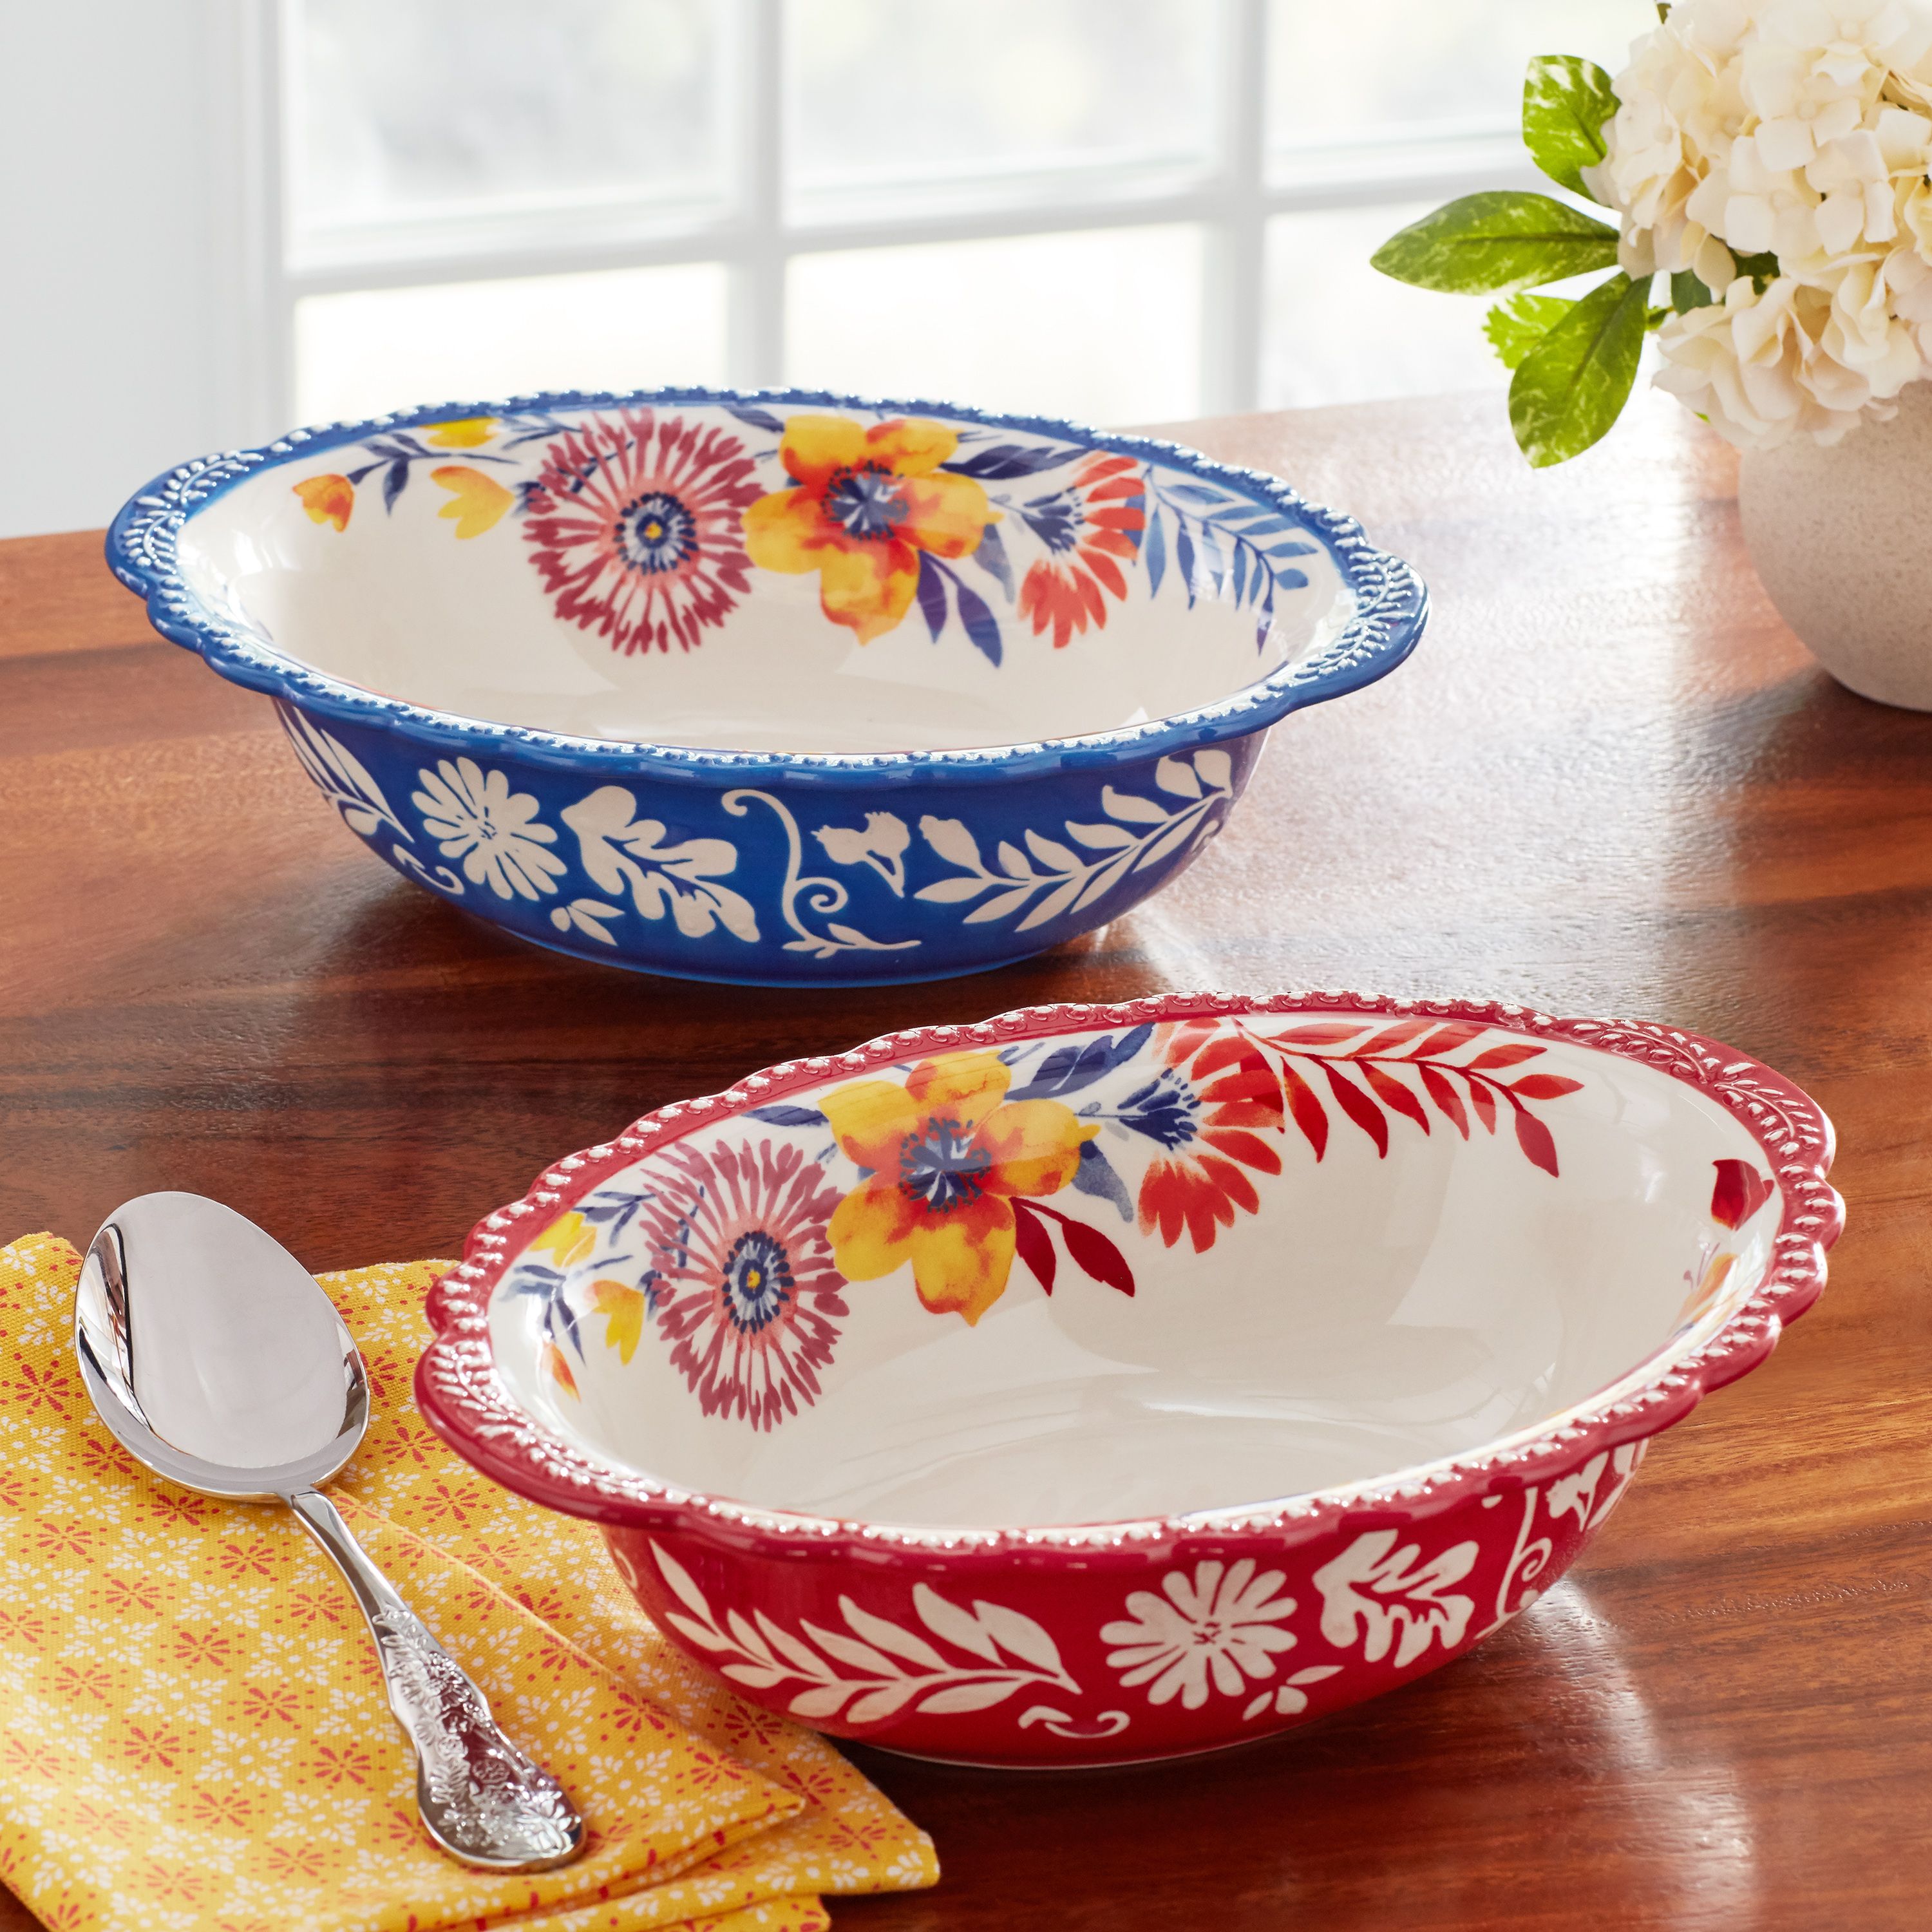 The Pioneer Woman Woodland Whimsy 2-Piece Vegetable Bowl Set